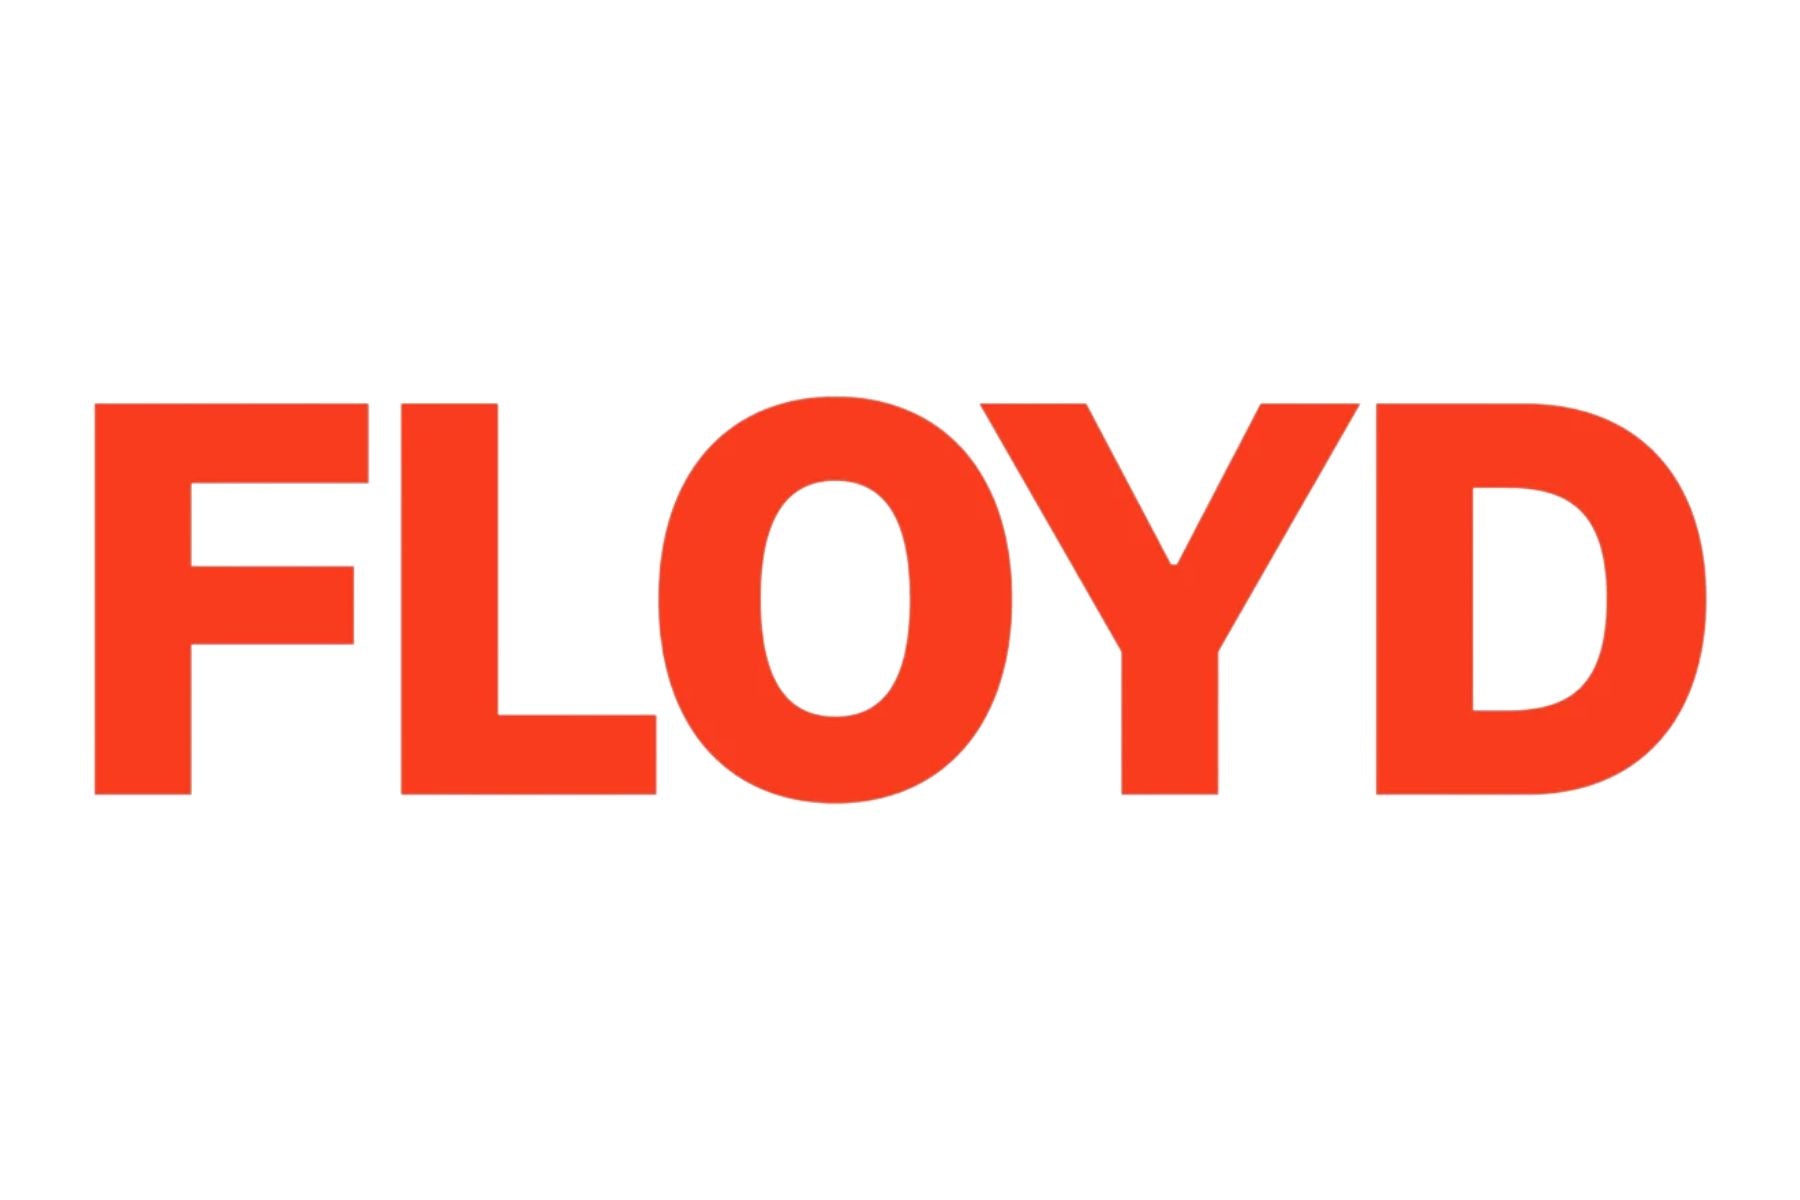 The image features the word "FLOYD" in all capital letters, written in a bold, red font against a white background.